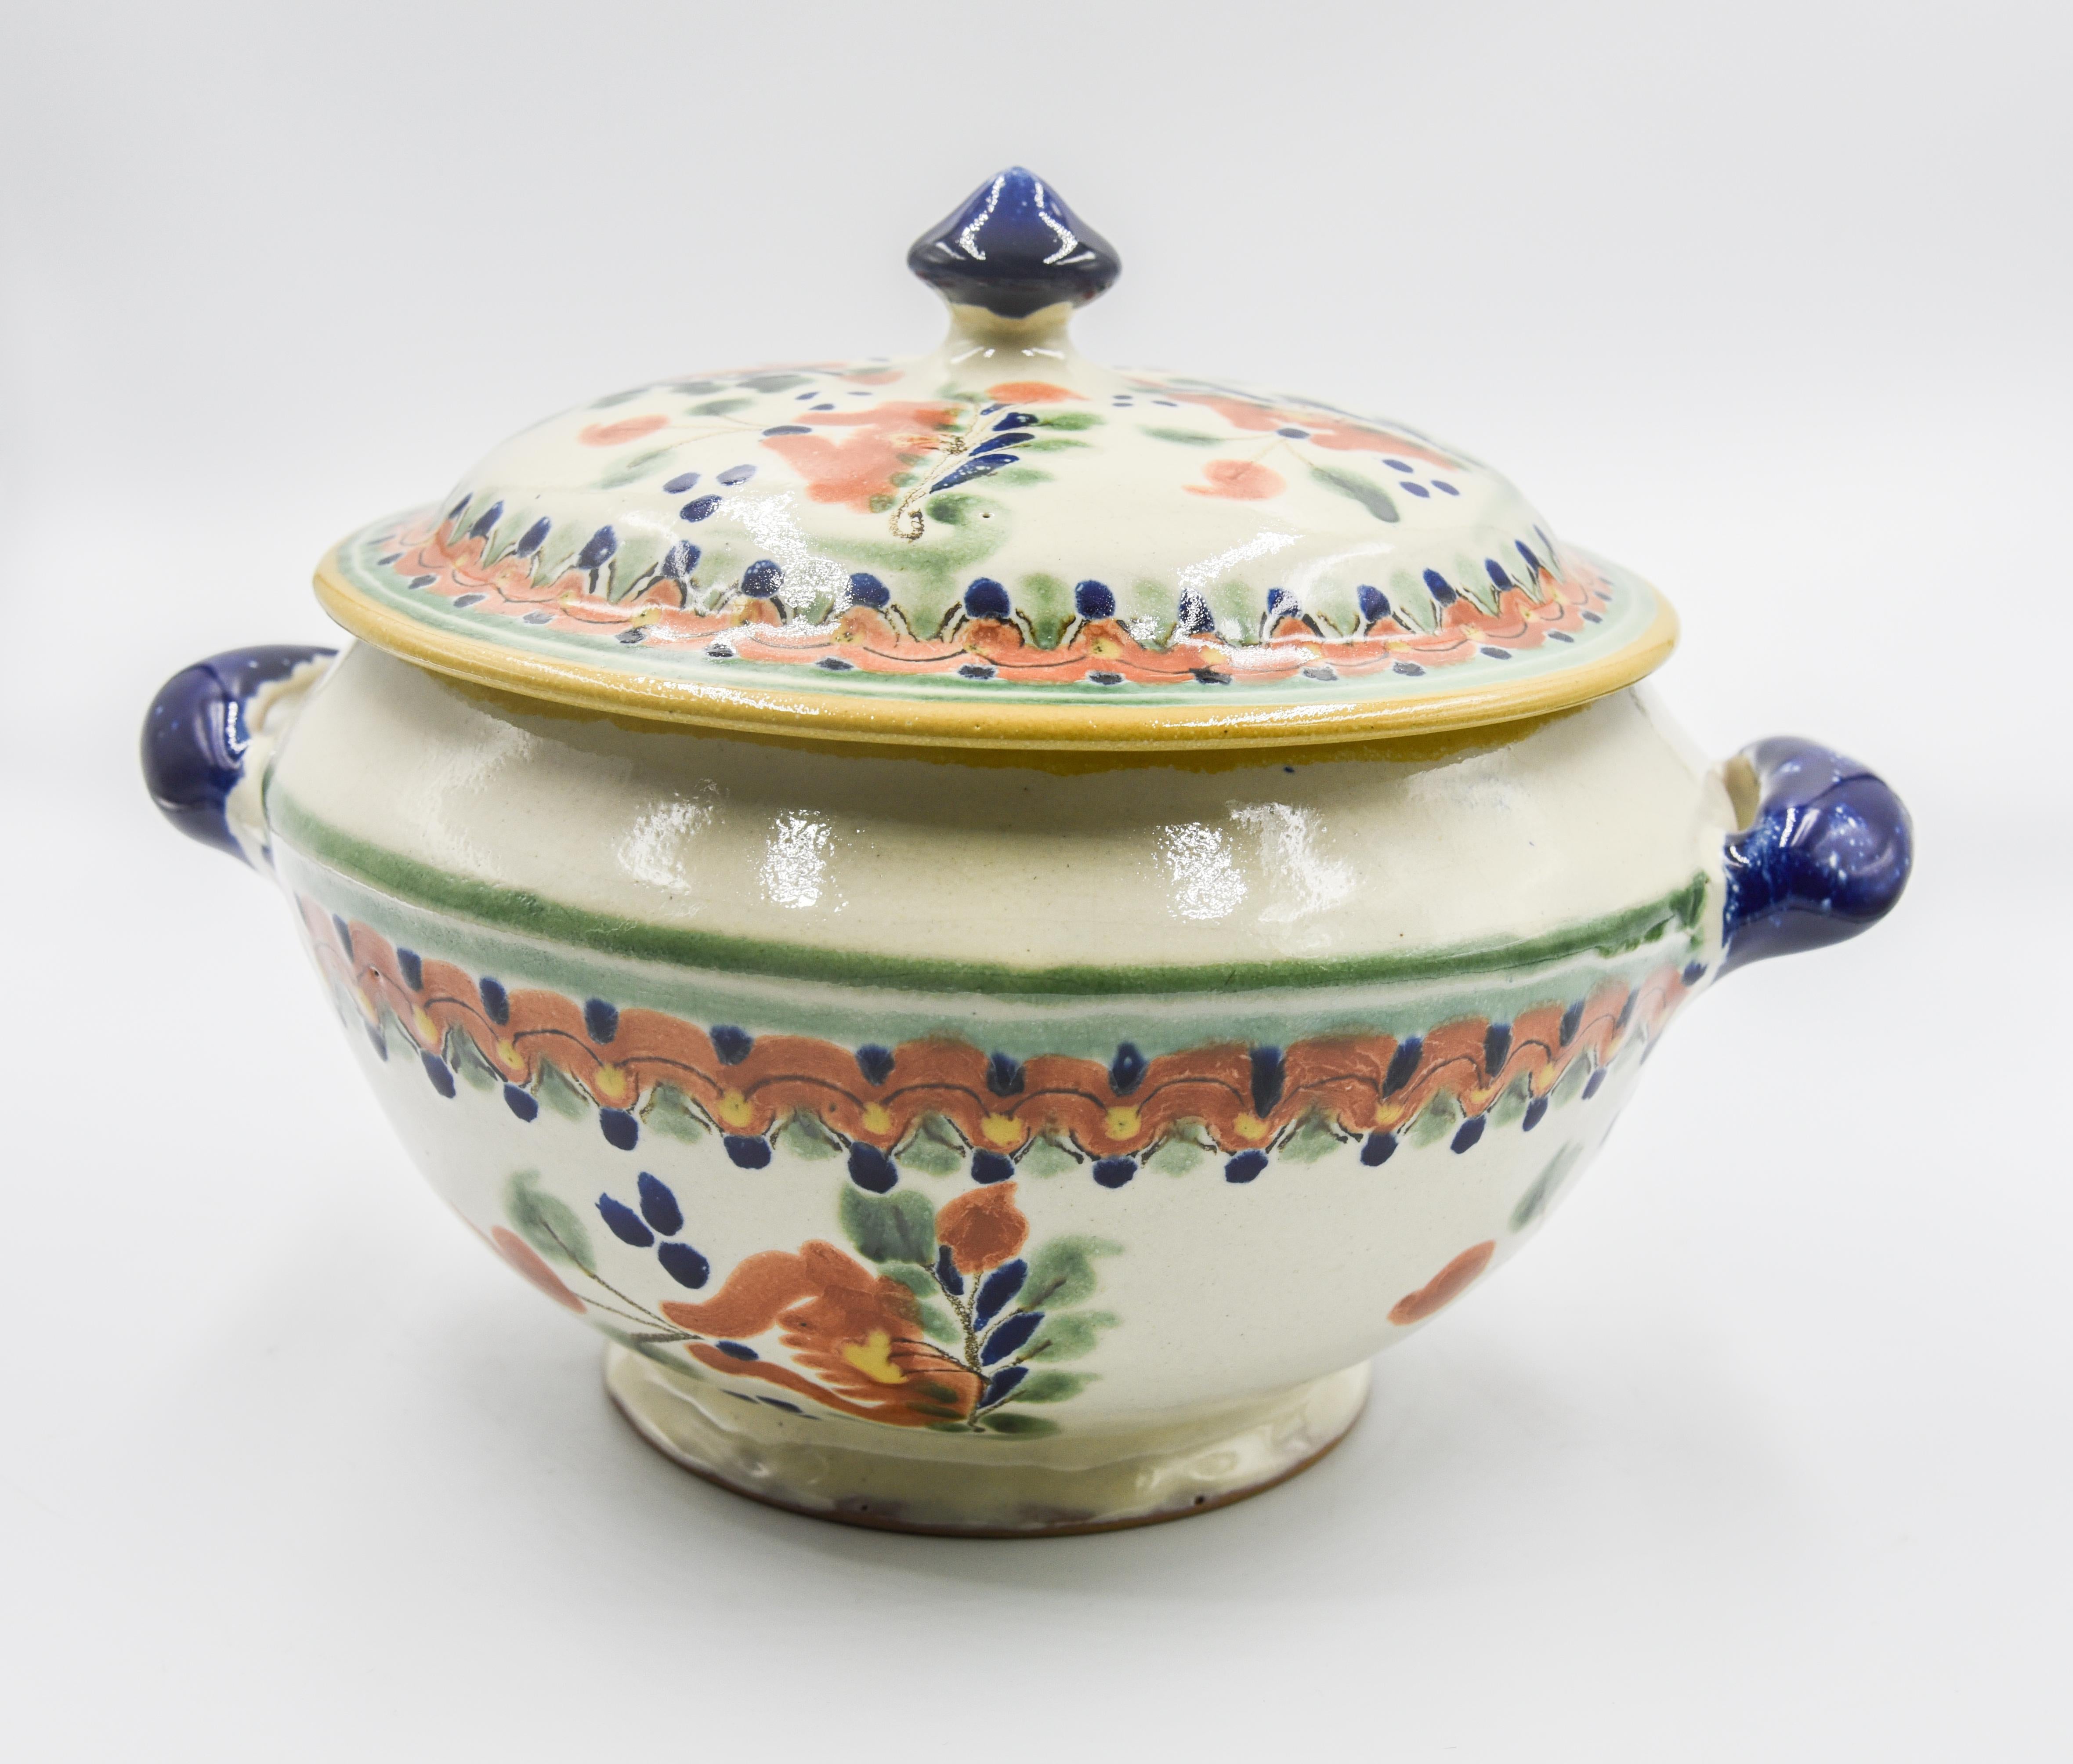 This Majolica Talavera serveware is a contemporary example of Talavera today. Artist Cesar Torres unmasks the past and portraits the present in a soup tureen -- rustic Mexican Hacienda elegance. Perfect for rustic kitchen decoration or utilitarian